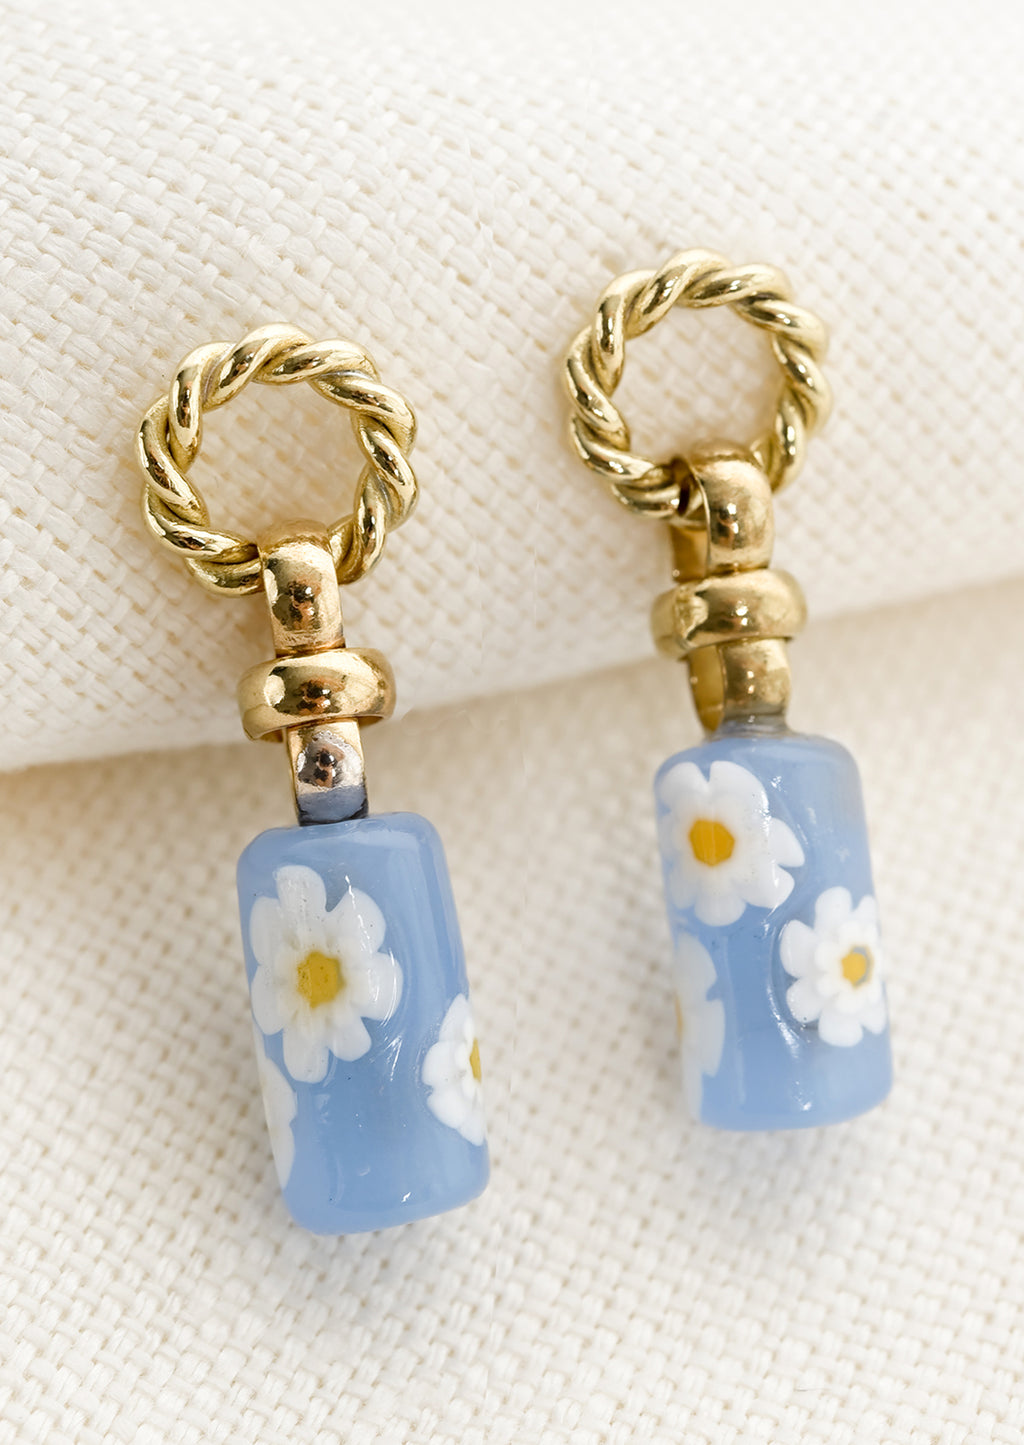 Sky Blue: A pair of earrings with circular braided brass post and blue floral glass bead.